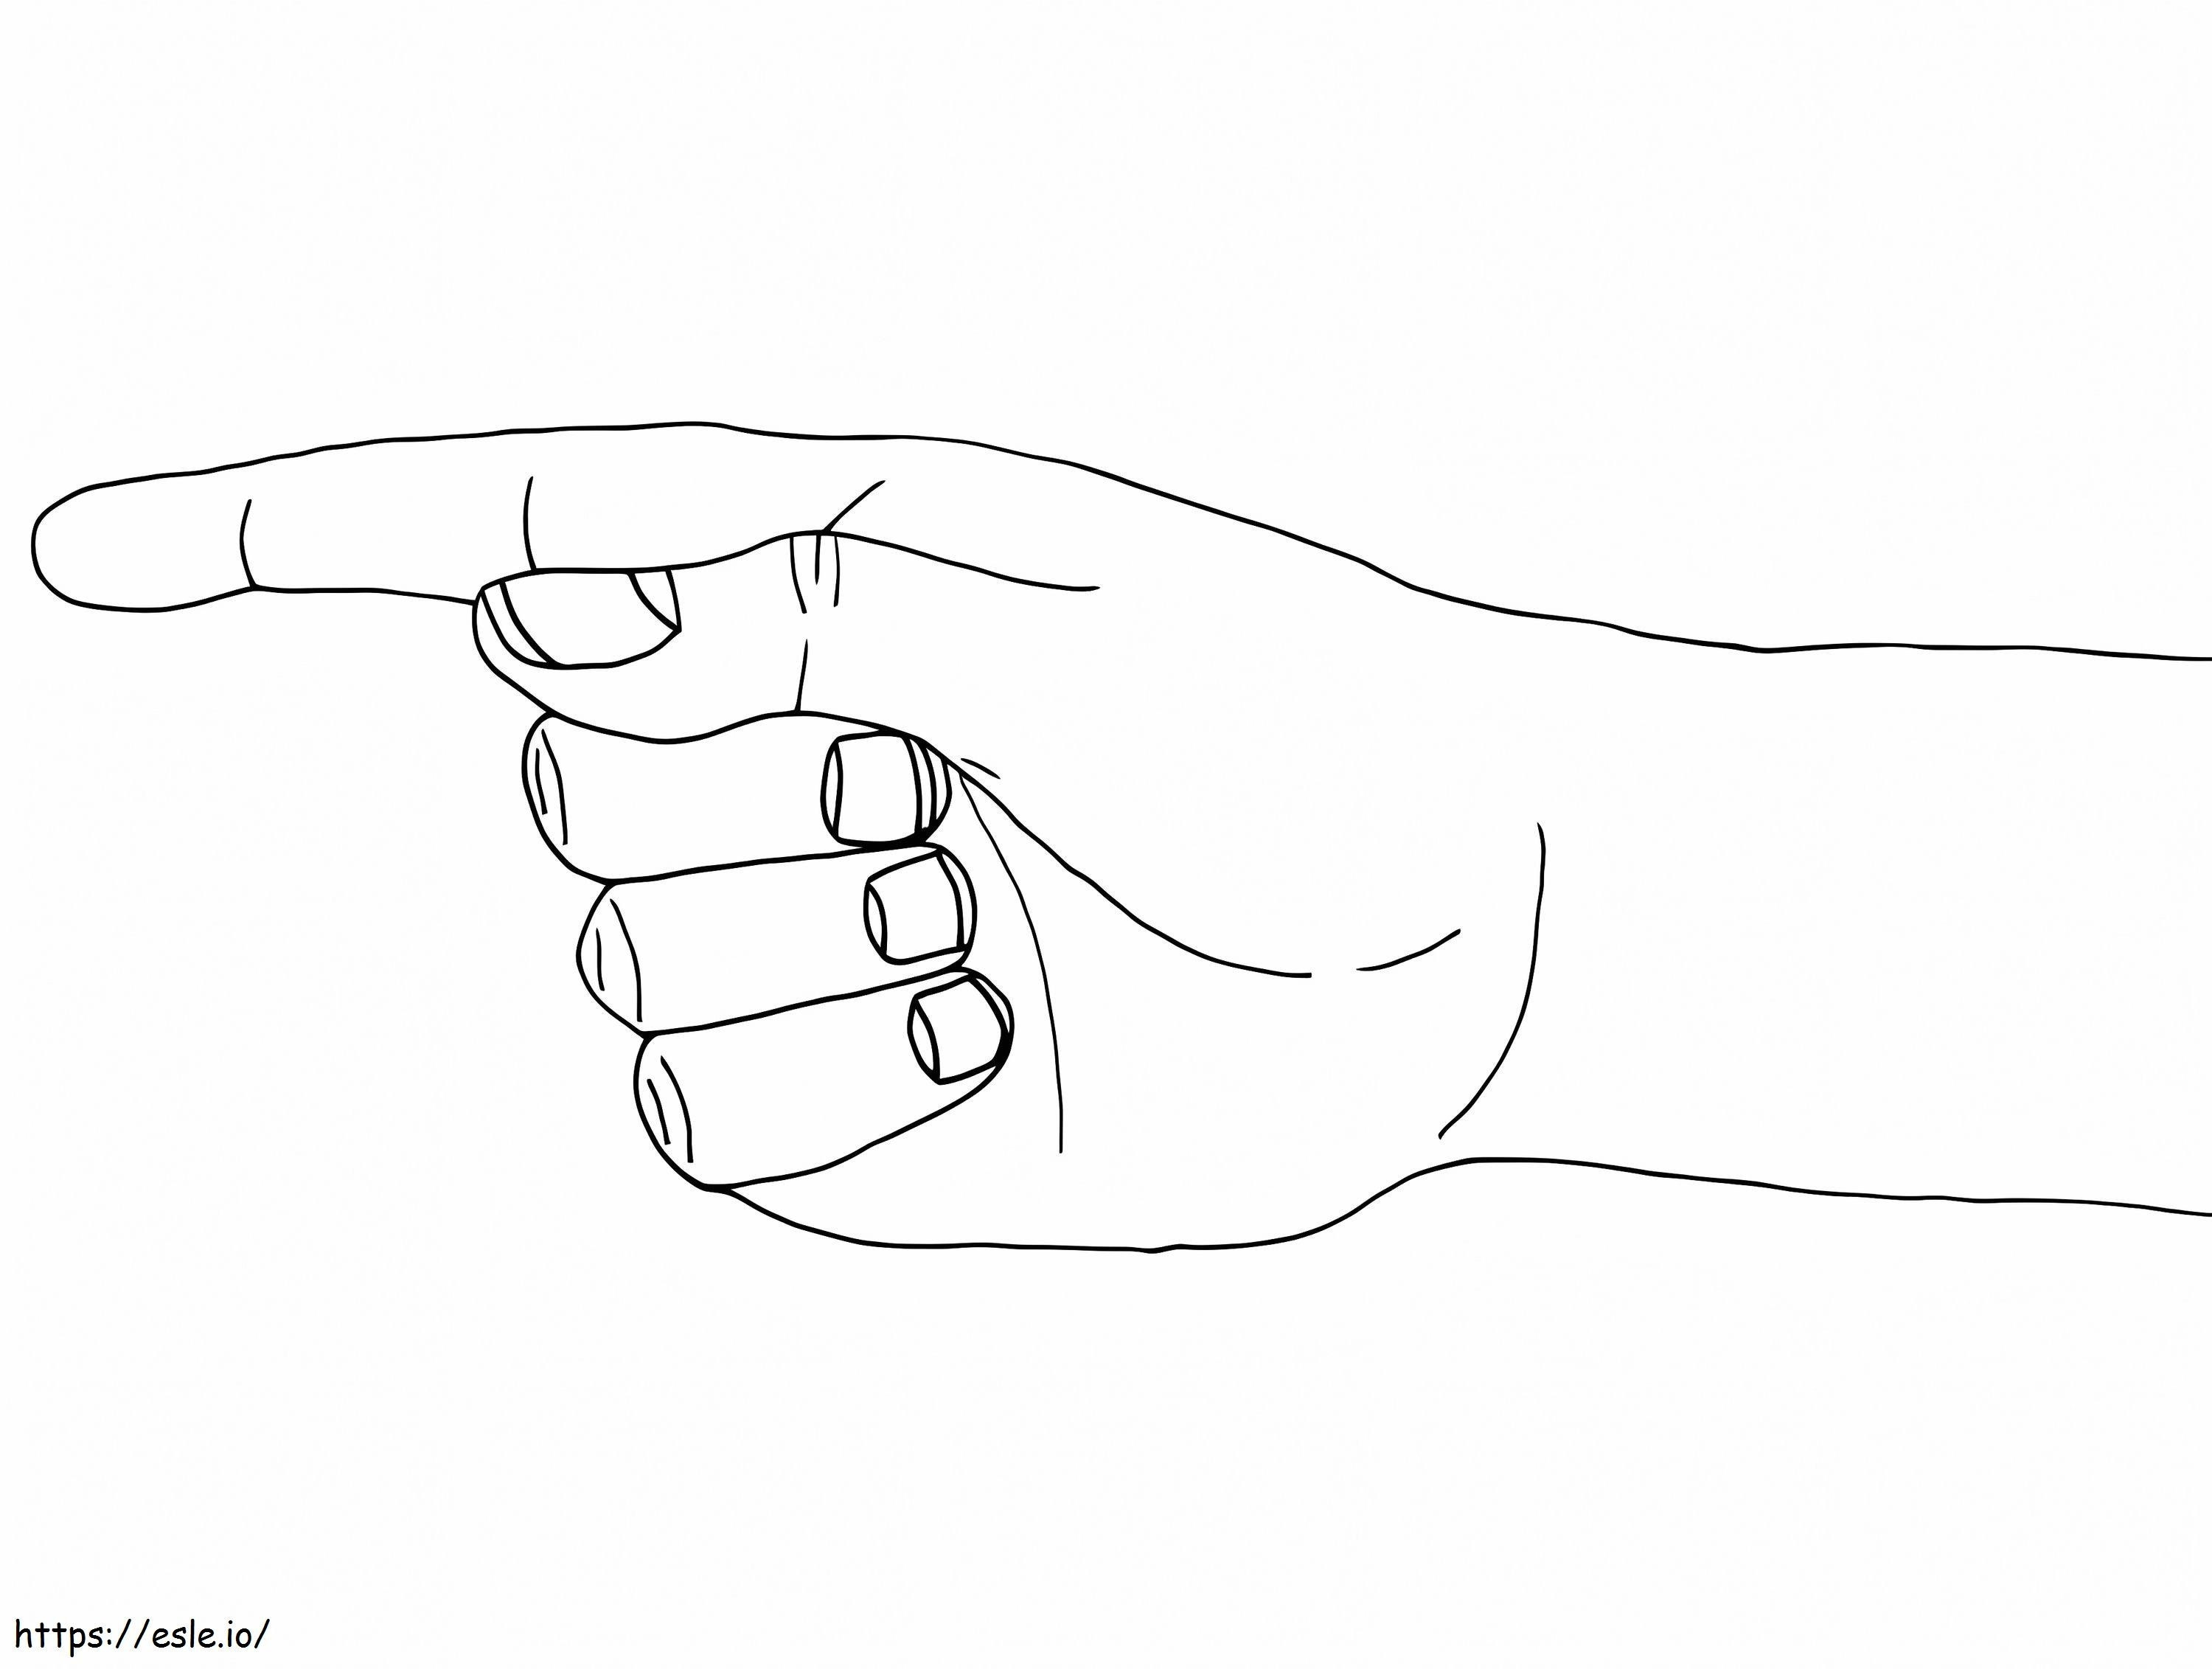 Pointing Hand 1 coloring page